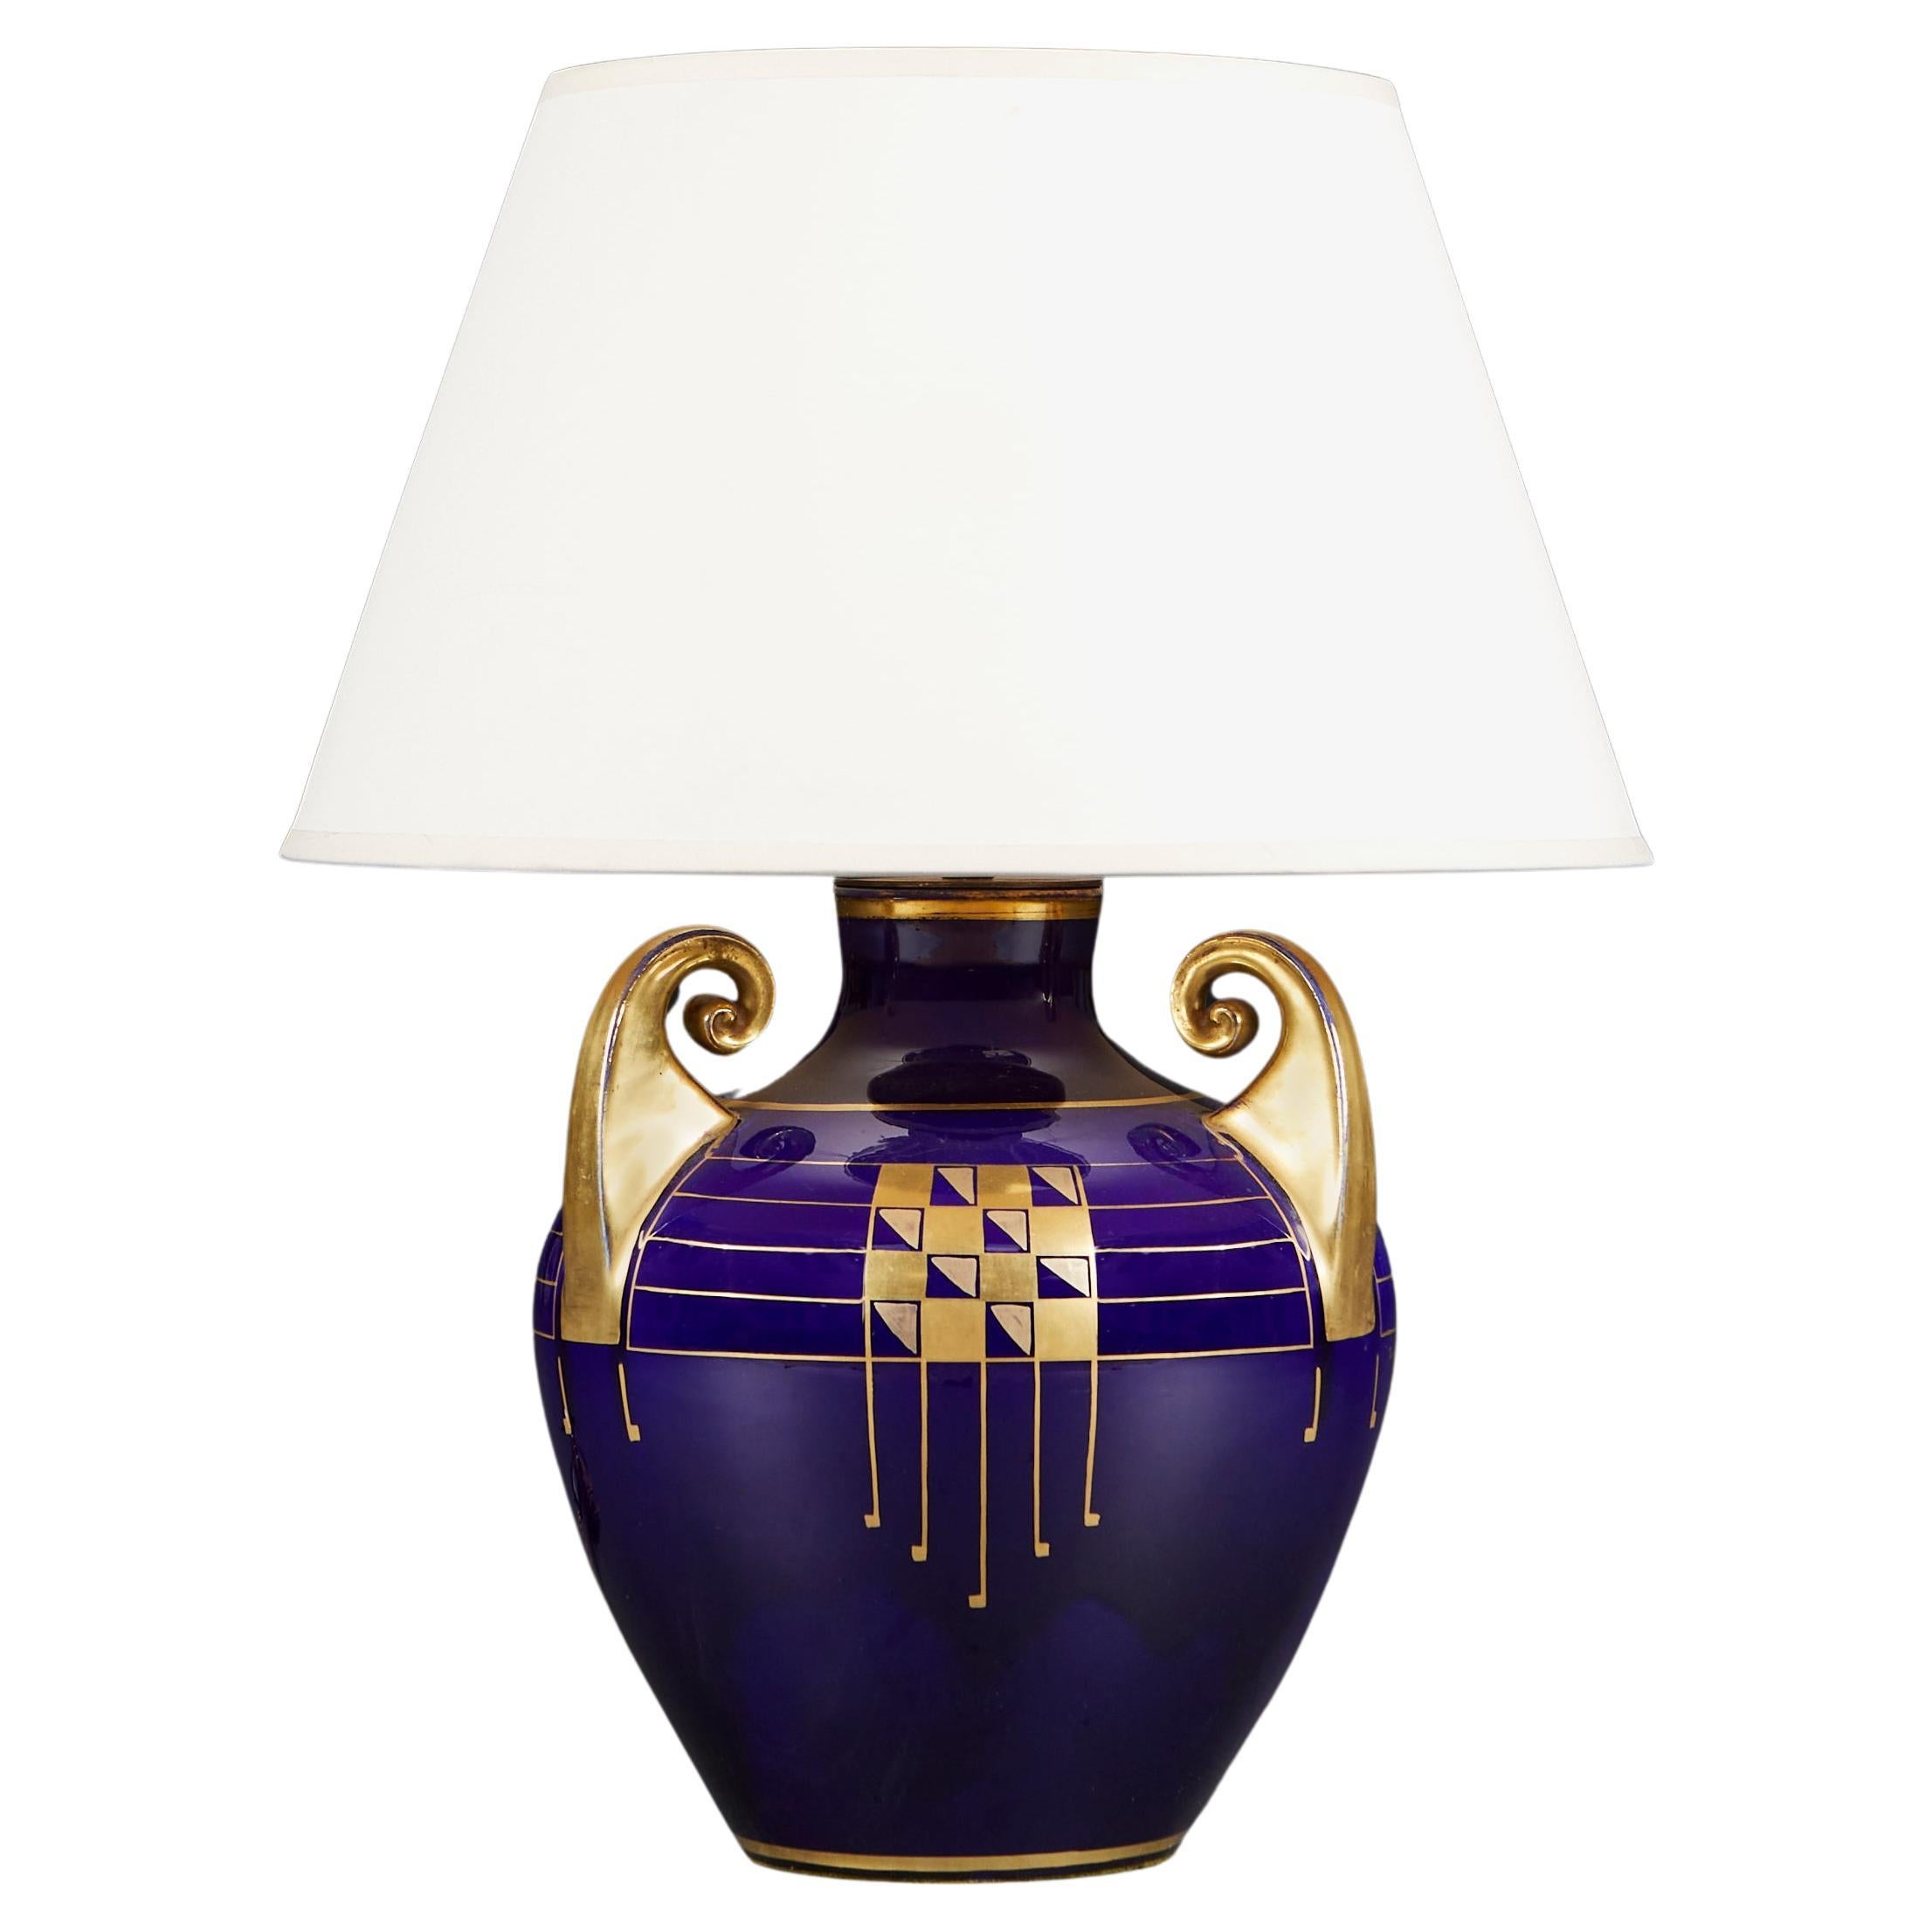 A Blue And Gold Art Deco Lamp For Sale